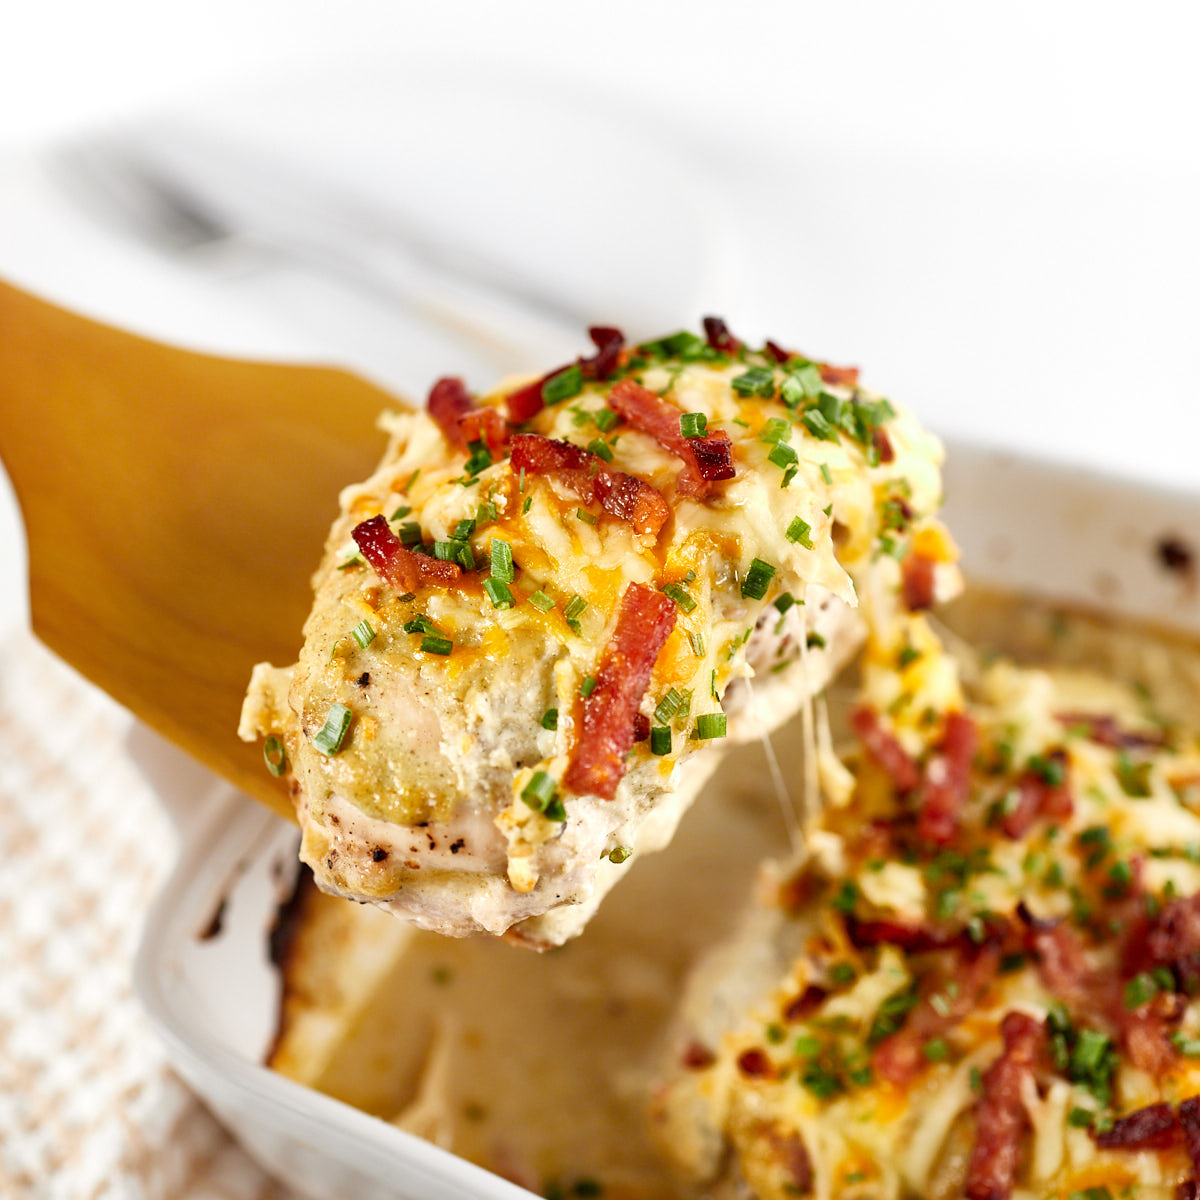 Chicken breast topped with crack dip, melted cheese and bacon.